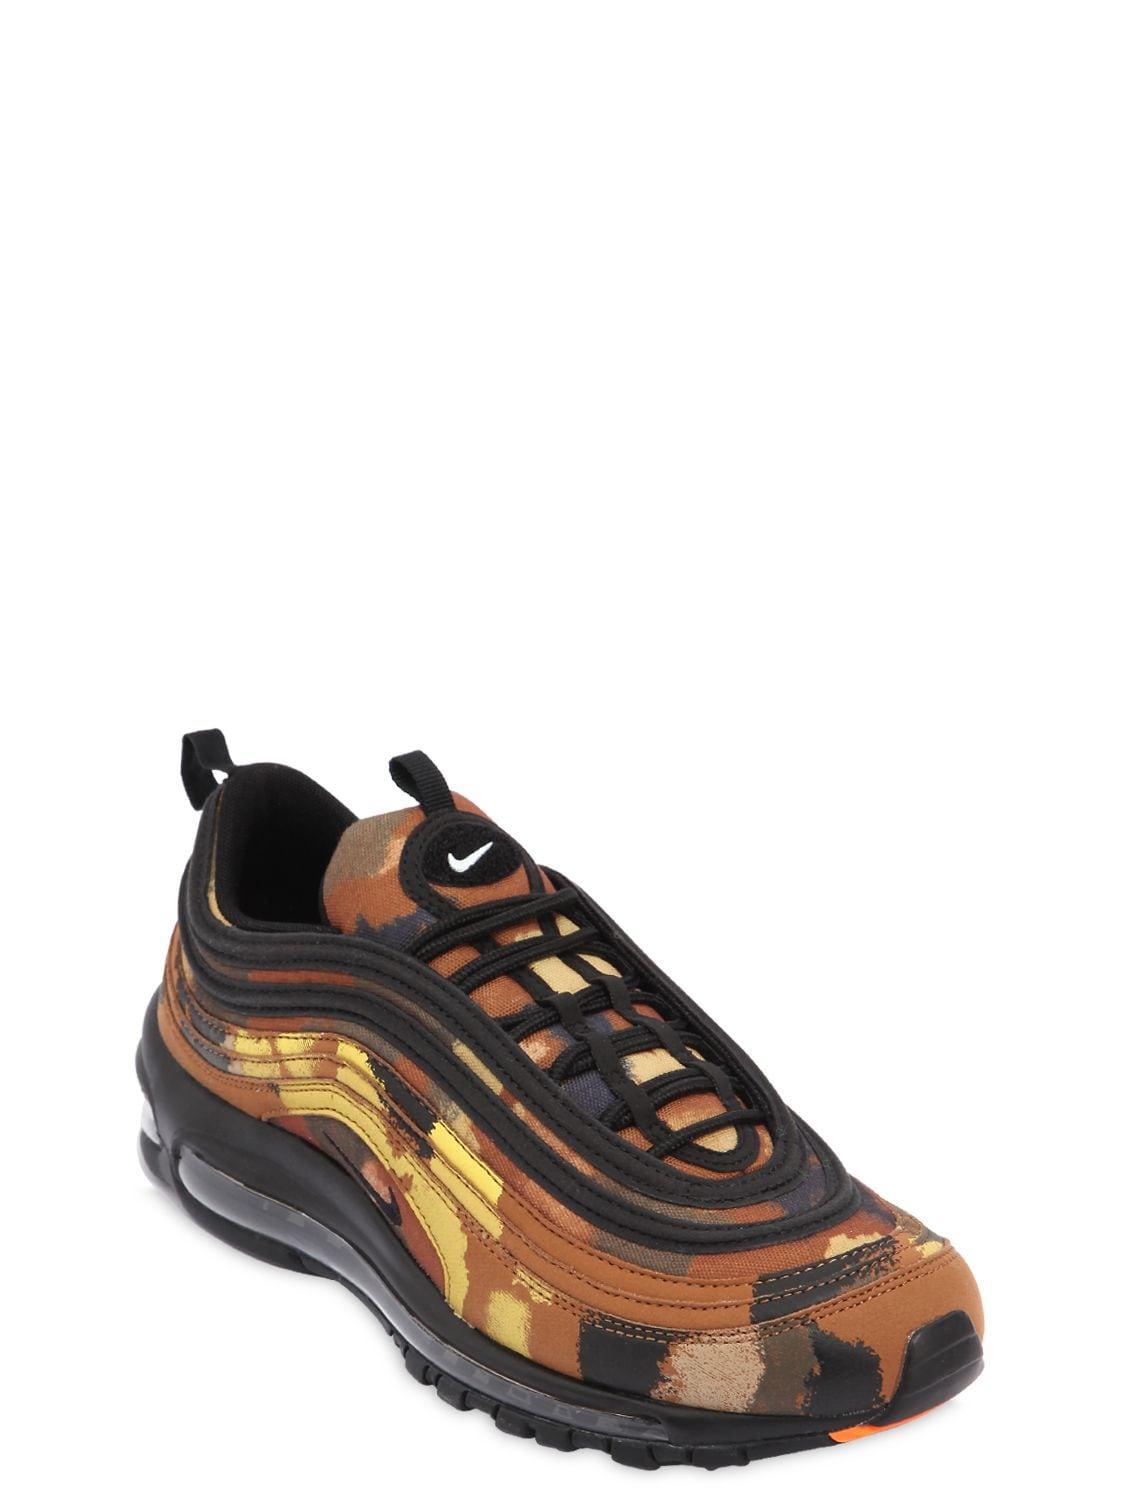 Nike Air Max 97 Camo Pack Italy Sneakers - Save 57% - Lyst